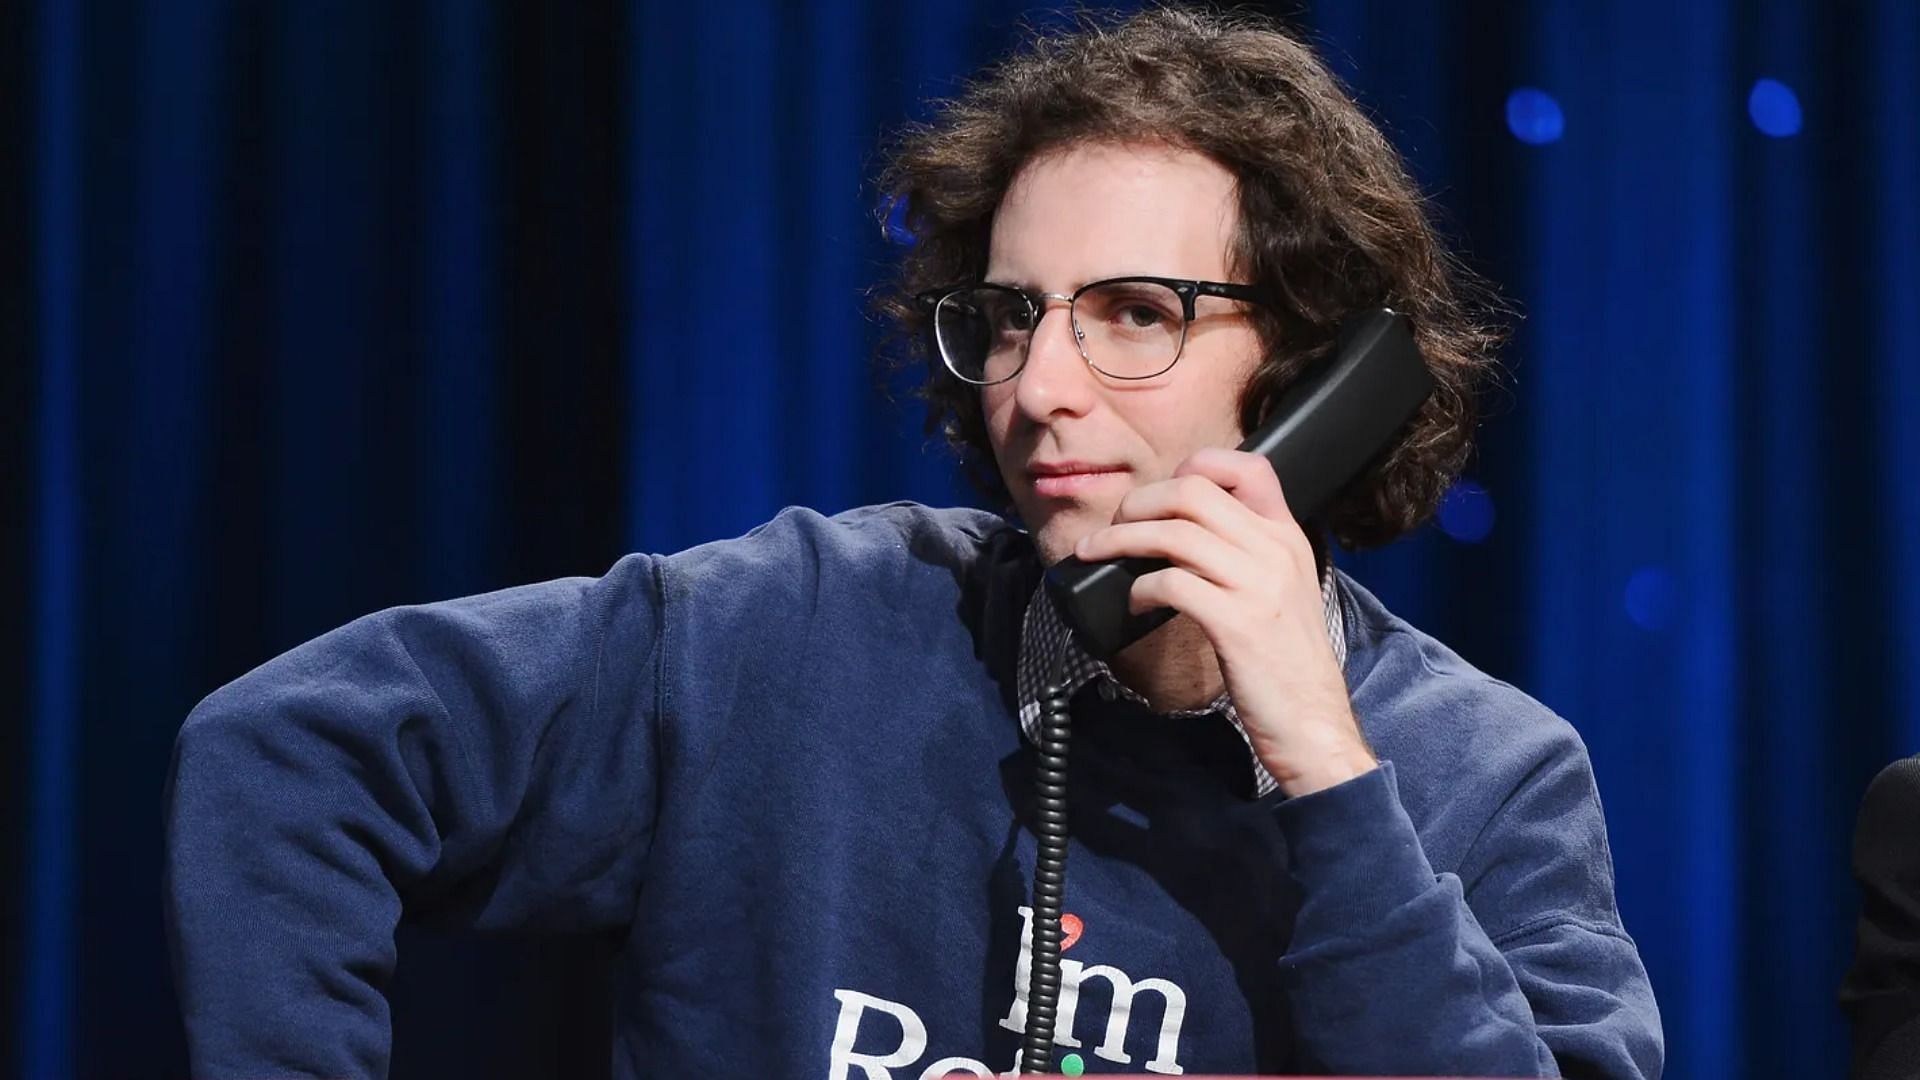 Kyle Mooney was among Kate McKinnon, Aidy Bryant, and Pete Davidson who bid goodbye to SNL on May 21. (Image via Getty Images/Stephen Lovekin)